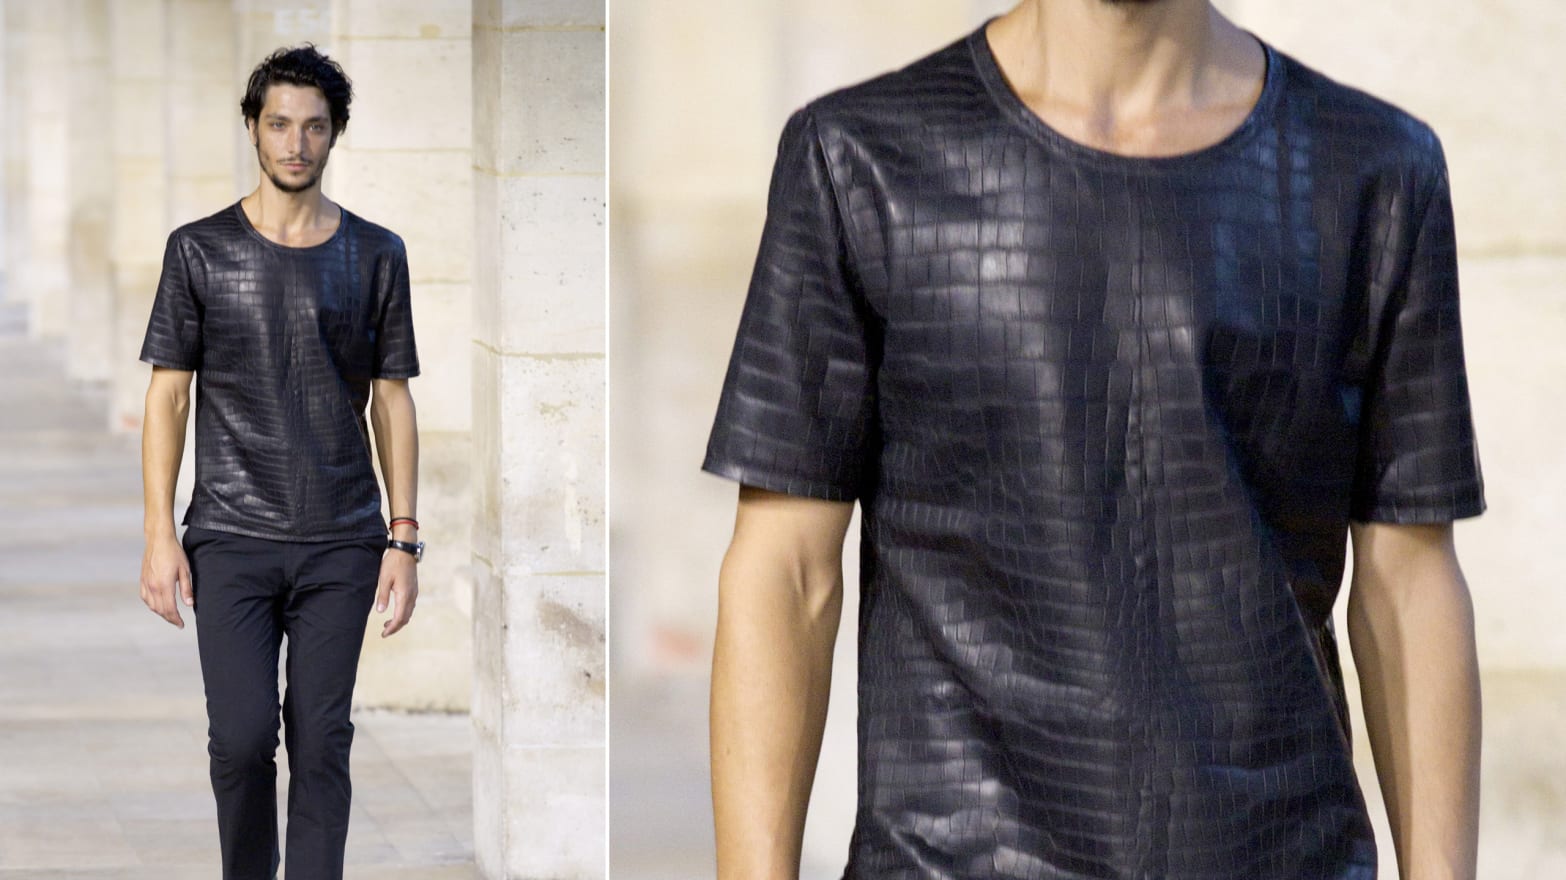 91,500 dollars for a T-SHIRT? A look at the Hermes garment that